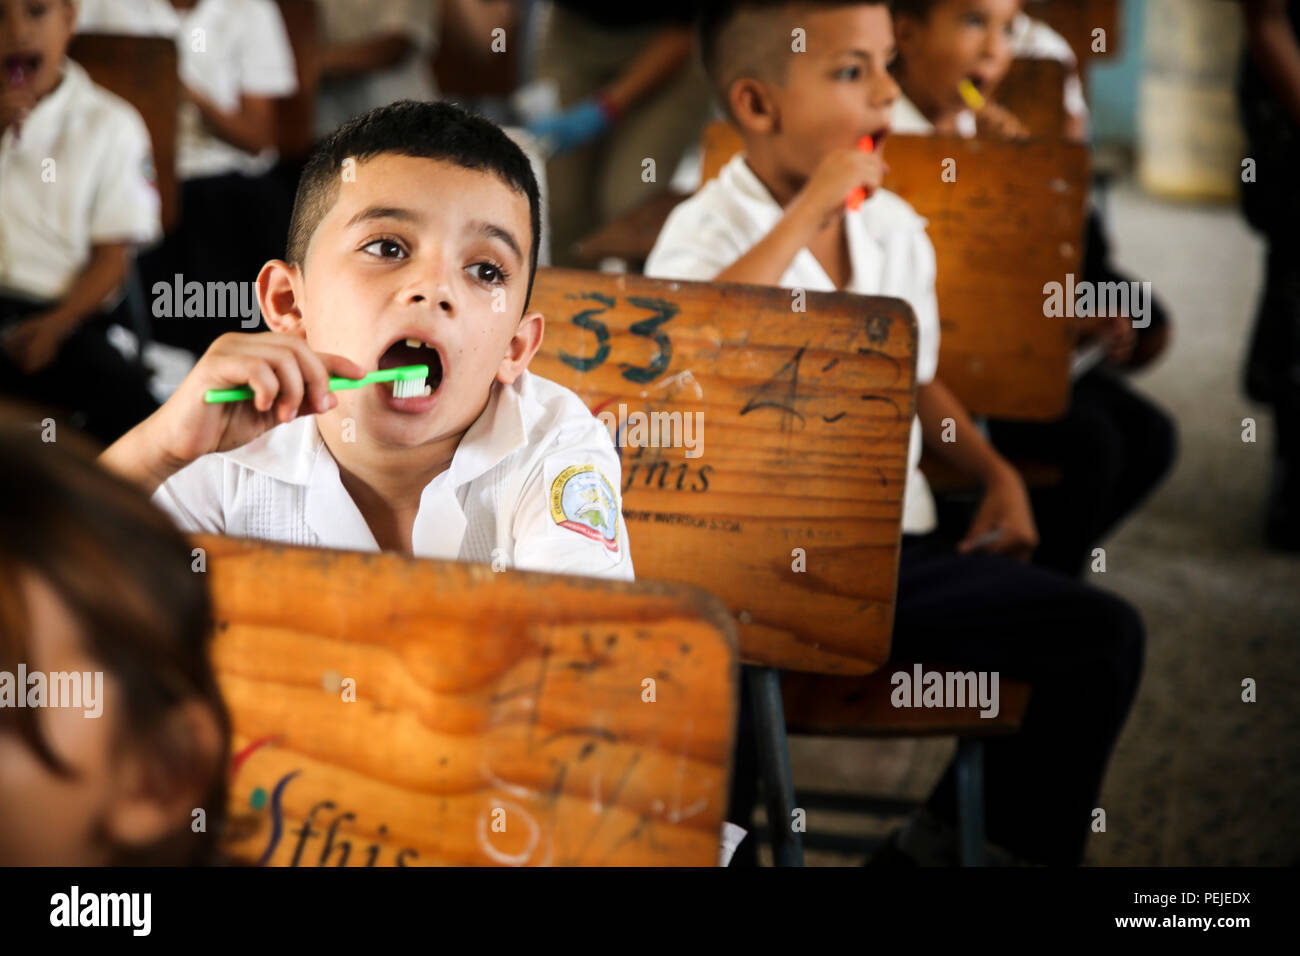 Students from Jairo Ayala School in Trujillo, Honduras practice brushing their teeth during a dental hygiene class given by the U.S. Navy on Aug. 31, 2015.  Members of the U.S. Navy donated shoes to the students and taught dental and general hygiene classes in support of Operation Continuing Promise. Operation Continuing Promise is a mission in which the United States military works with host nations to provide humanitarian assistance and execute civil-military operations alongside various partner nations within the Caribbean and Central and South America. (U.S. Marine Corps photo by Cpl. Kirs Stock Photo